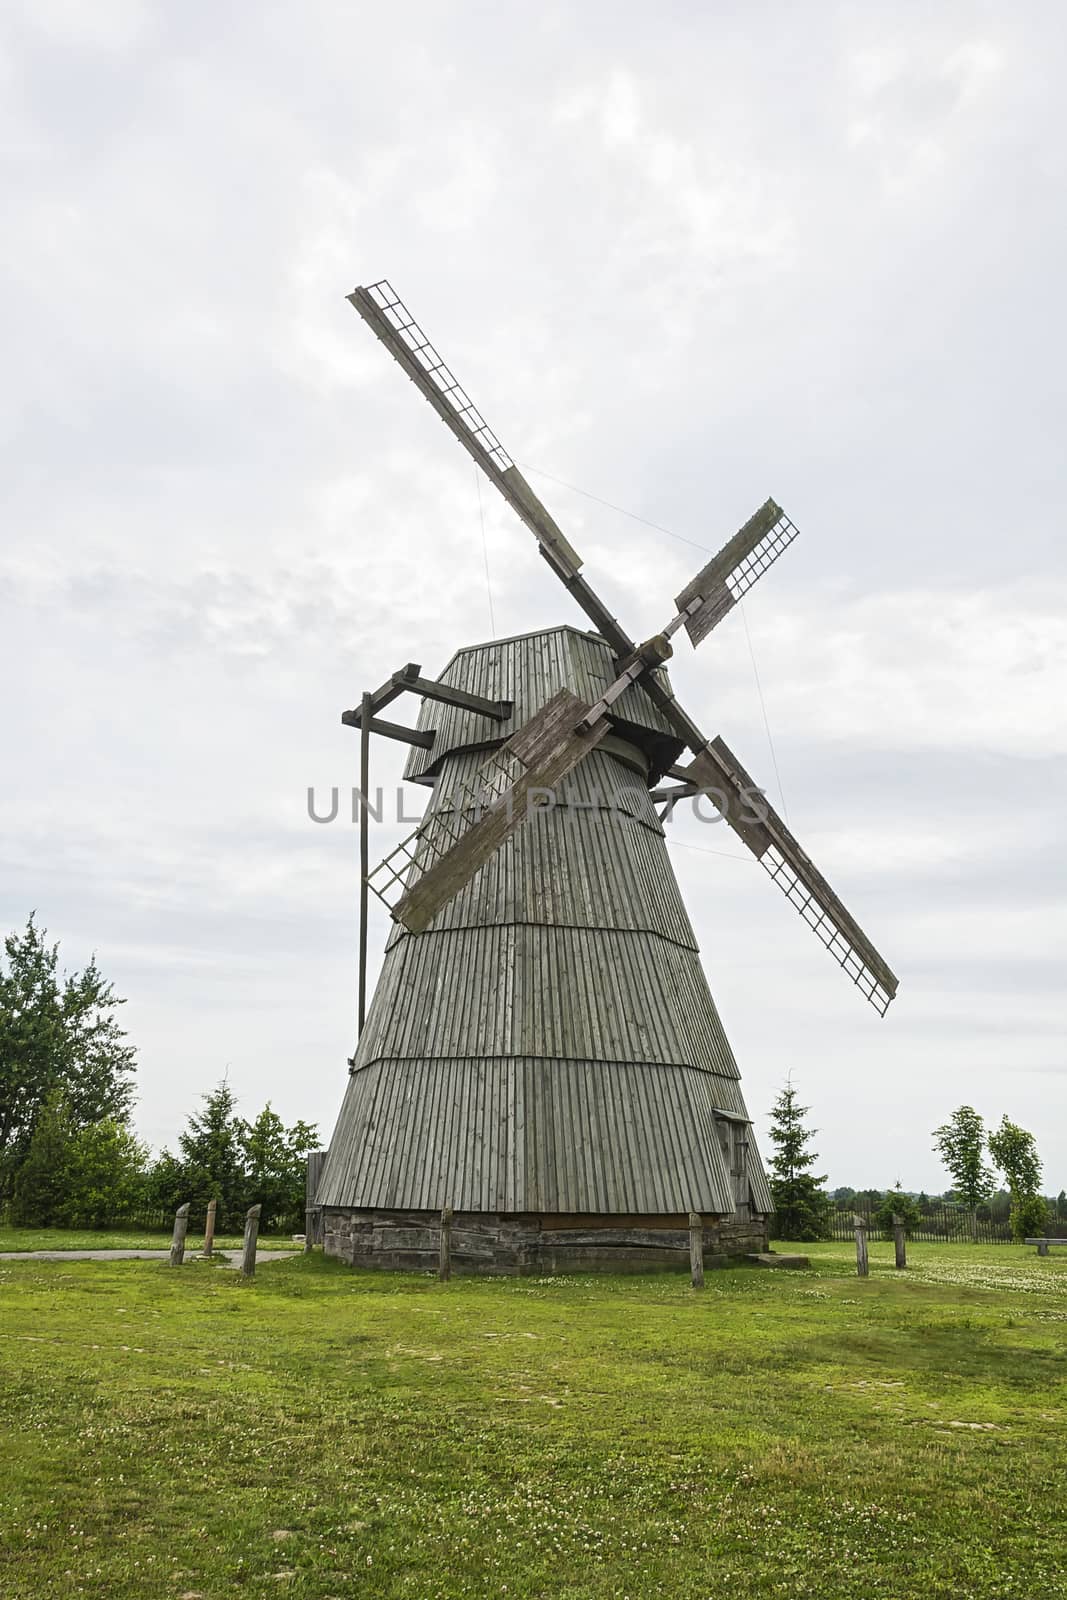 Windmill for grinding grain into flour by Grommik